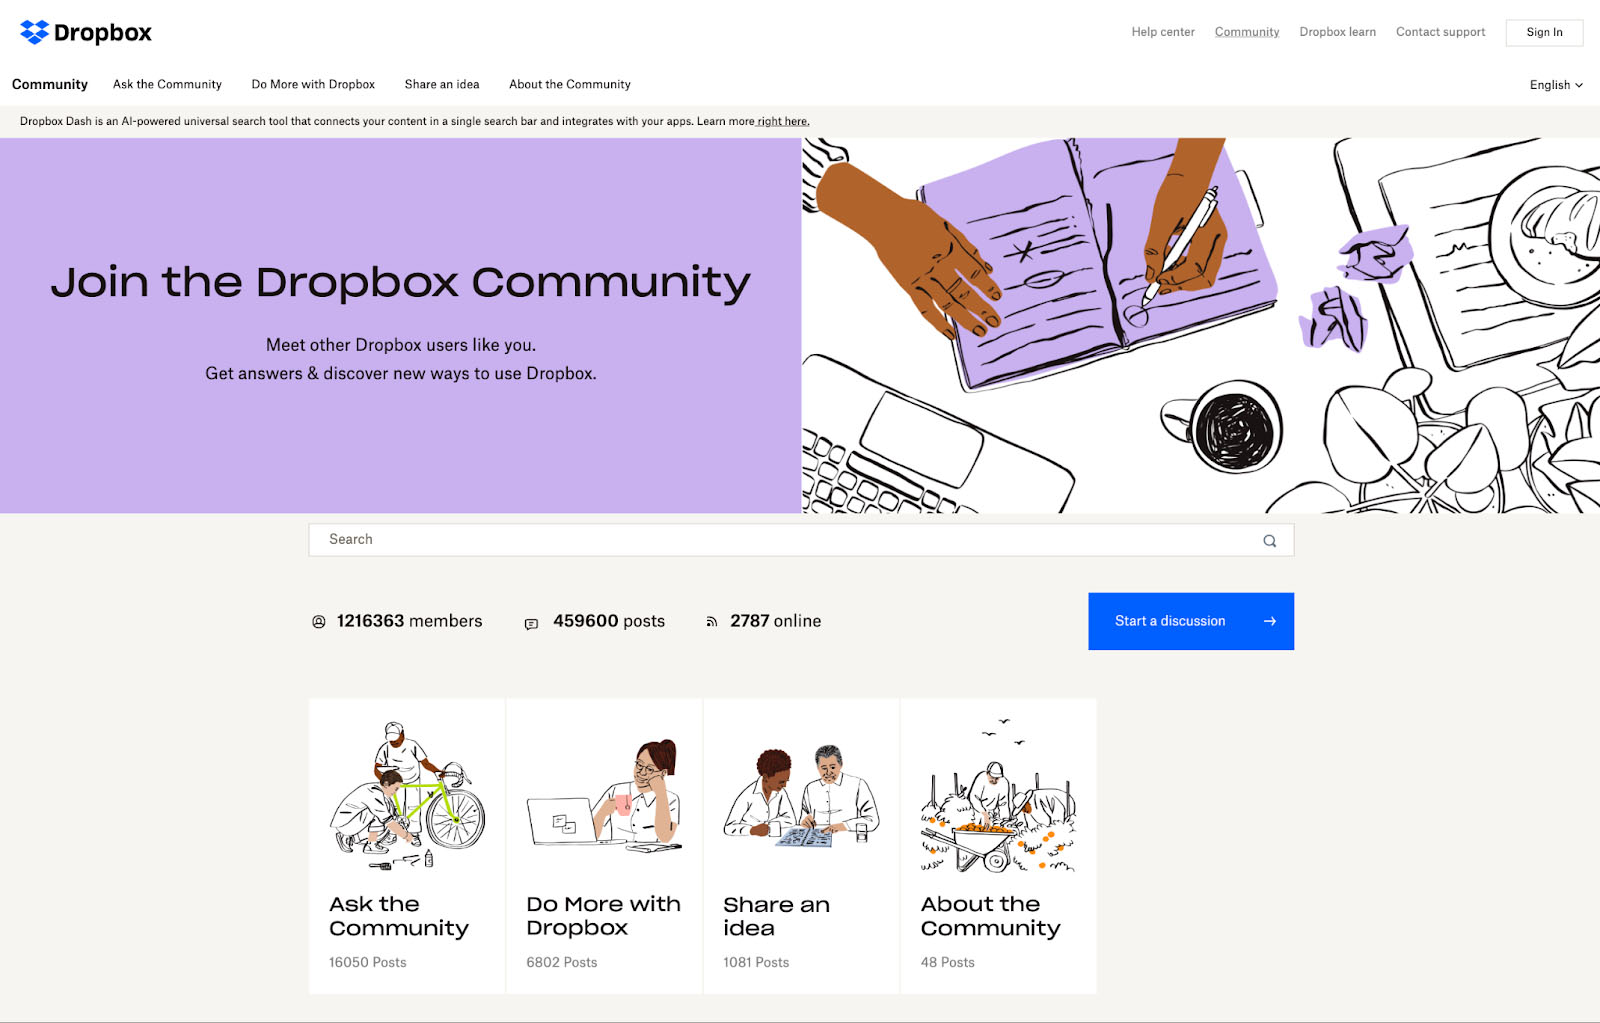 Dropbox website shows the community page, which has a banner that says "Join the Dropbox Community" and an accompanying image of a workstation. Below the banner is a search bar and the number of members, posts, and online users.